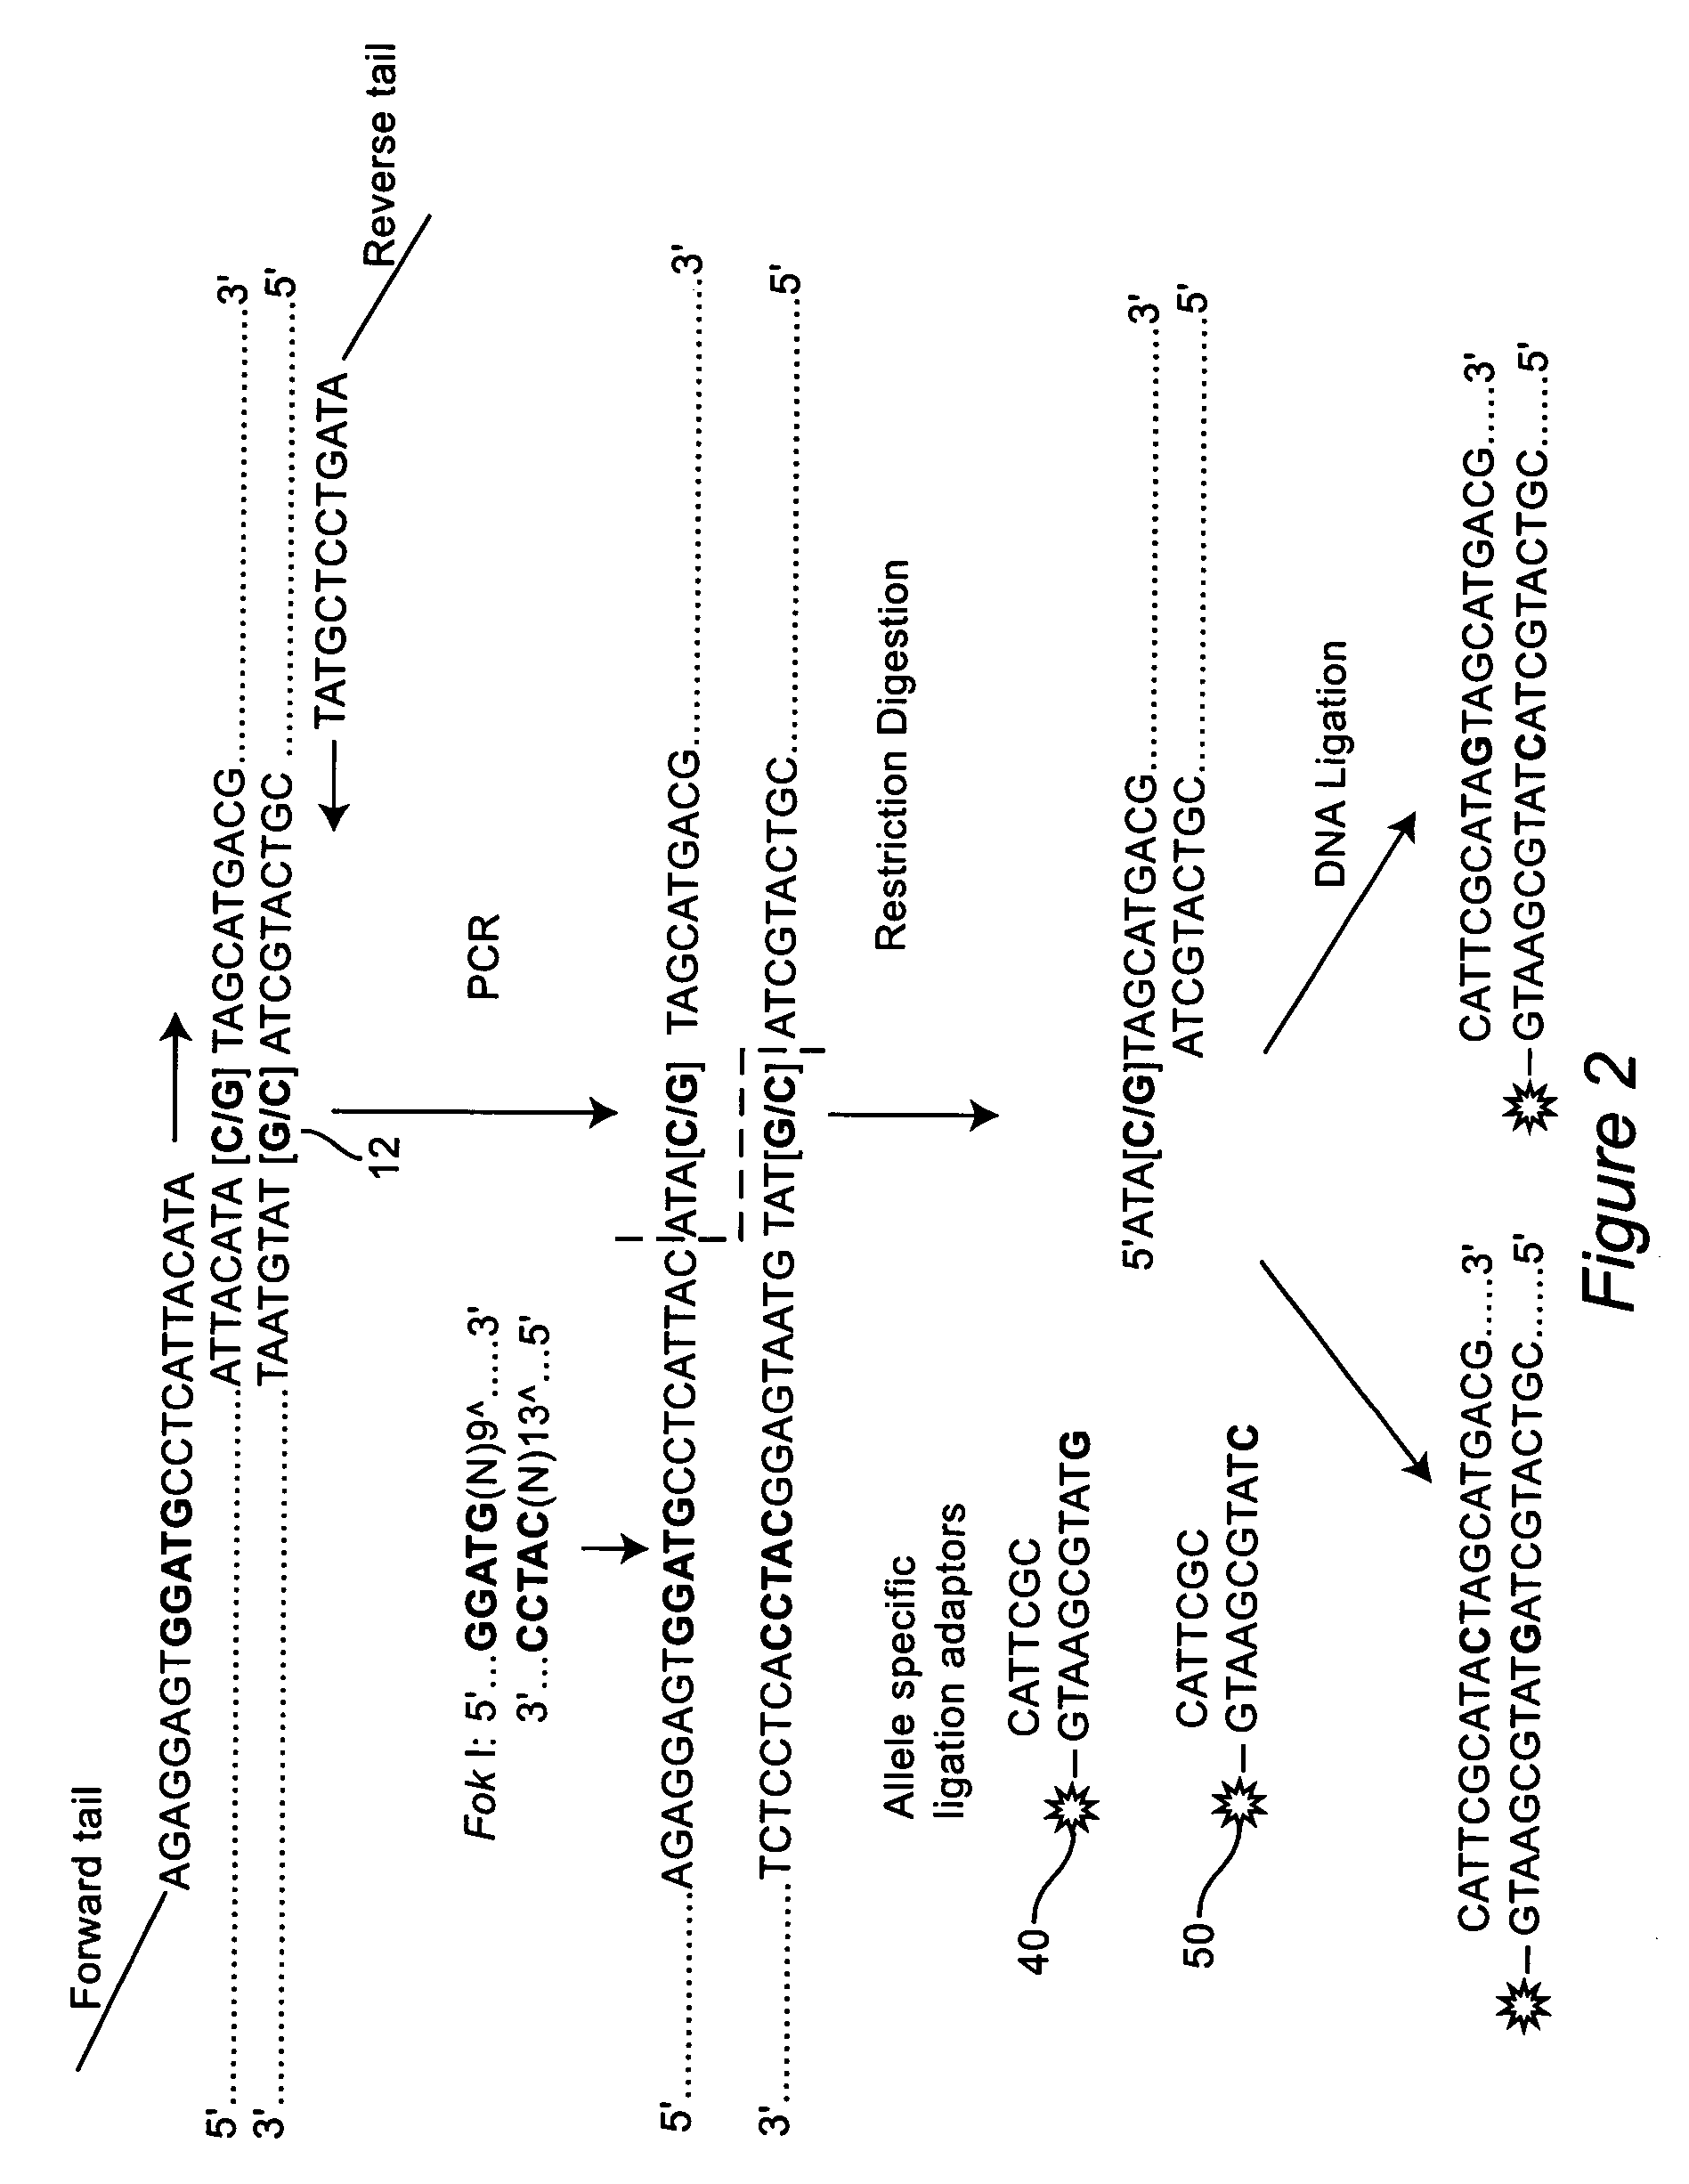 Restriction enzyme mediated method of multiplex genotyping